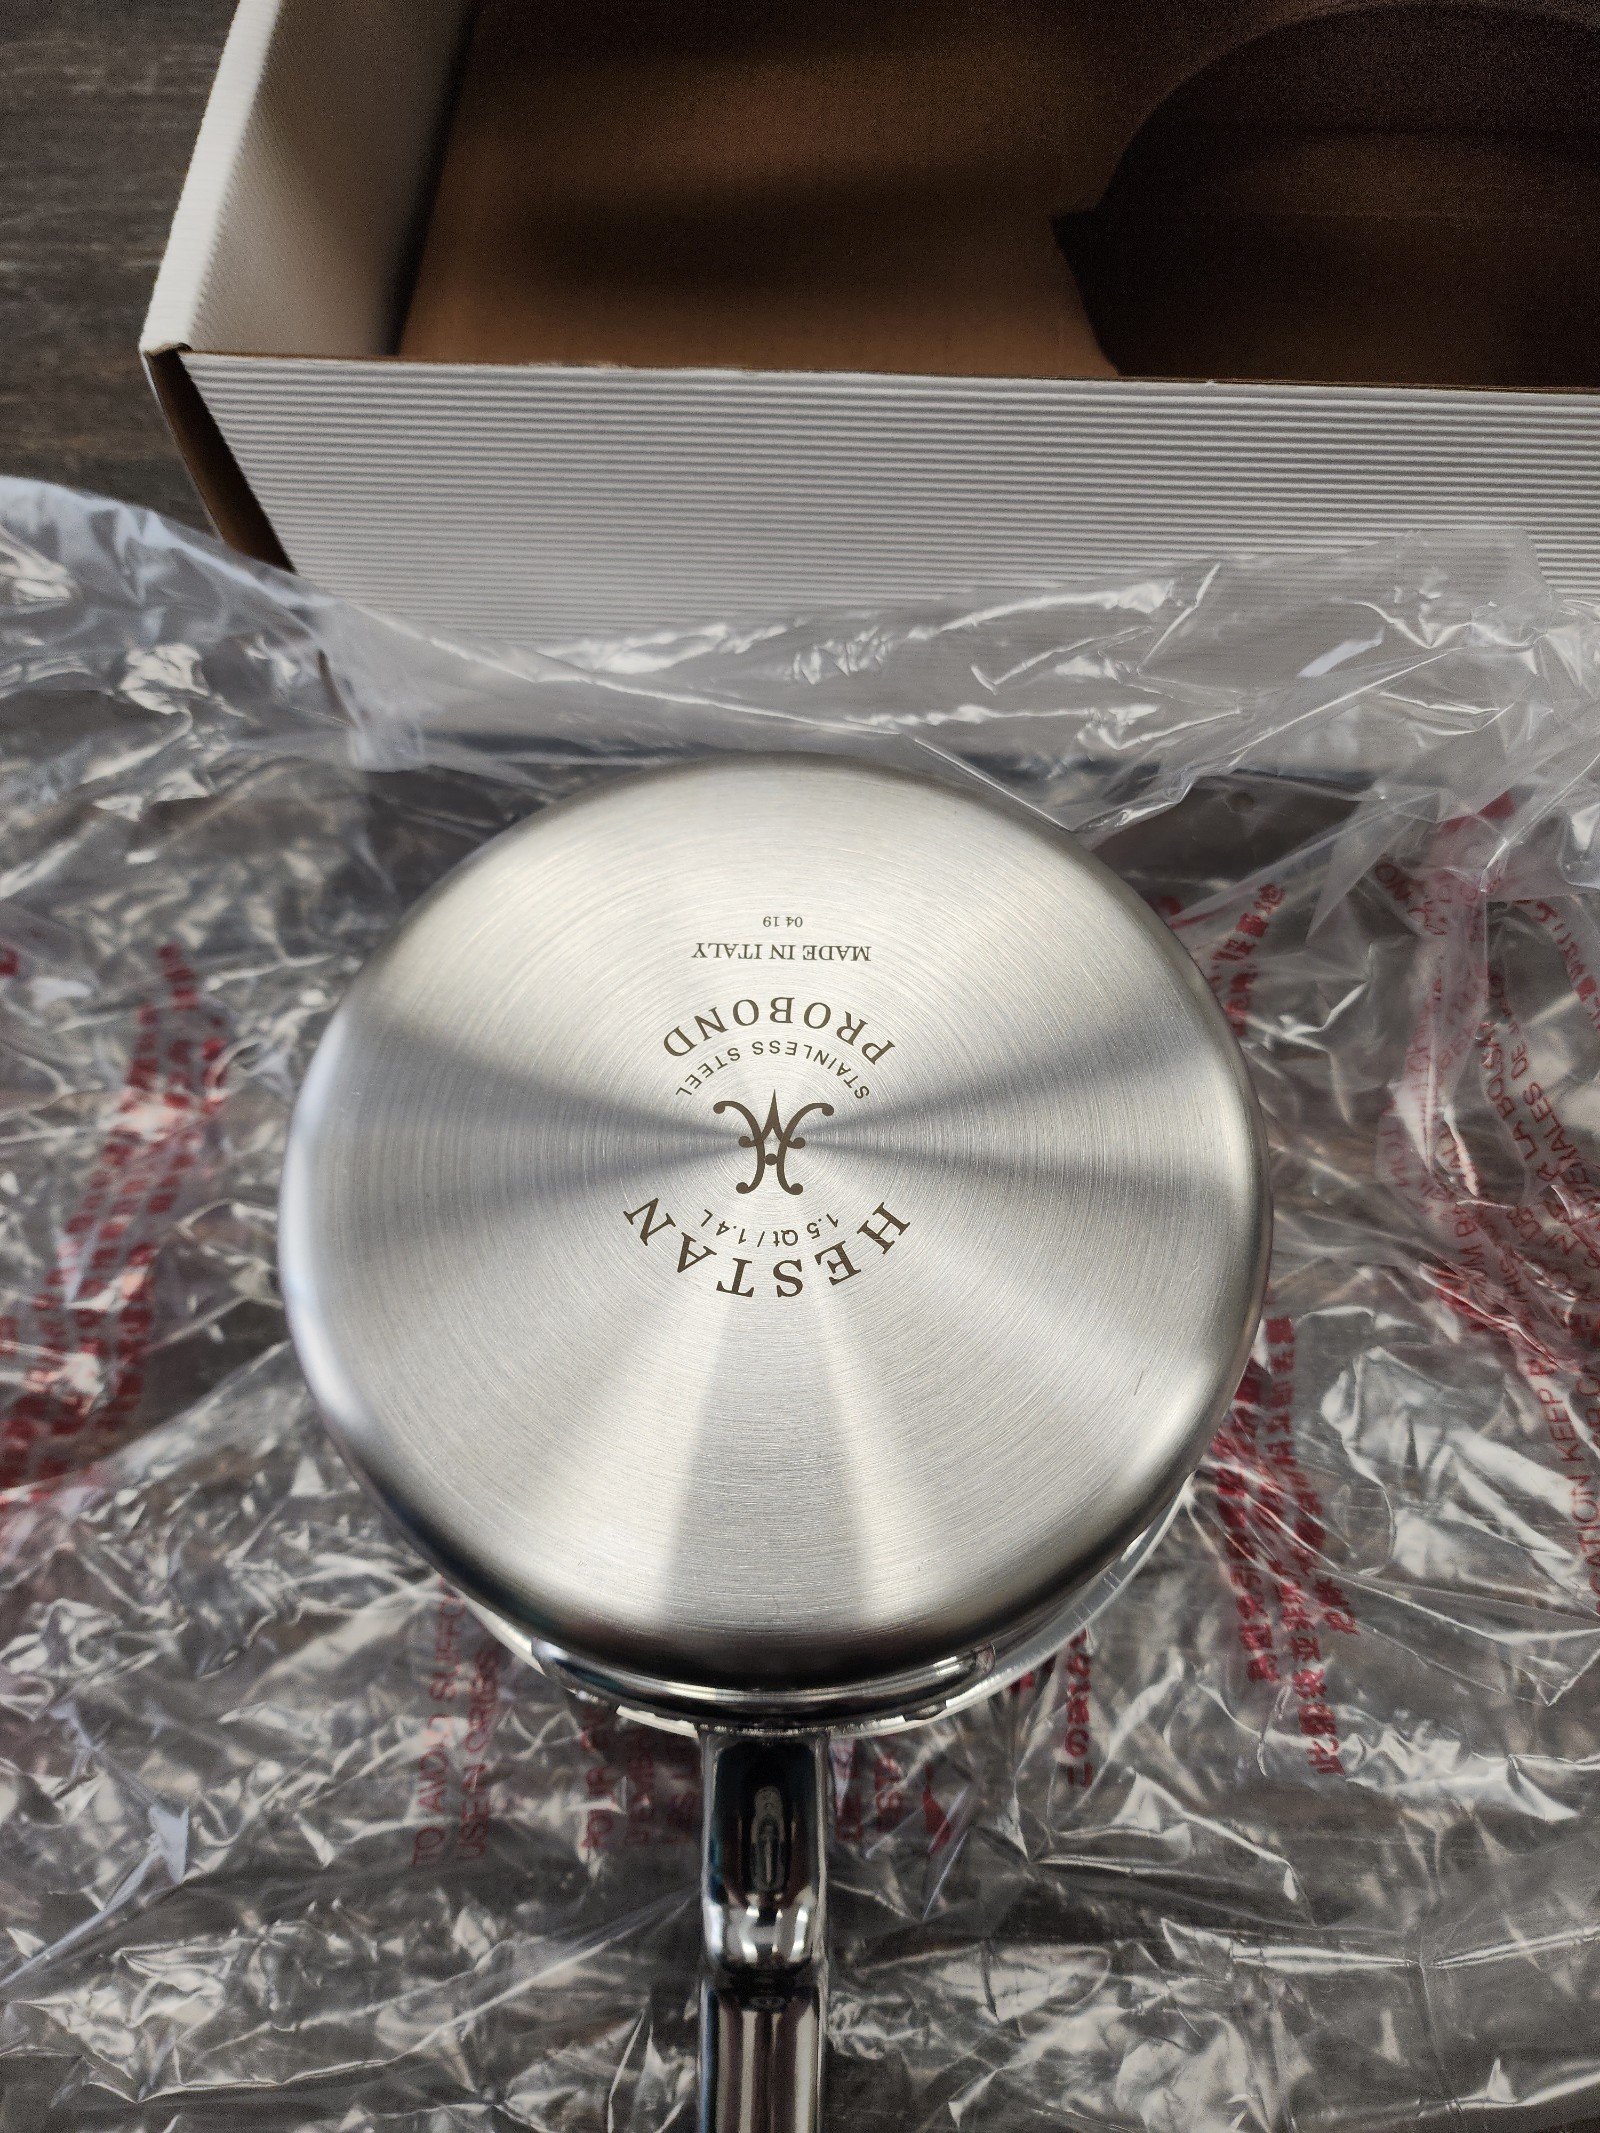 Hestan - ProBond Collection - Professional Clad Stainless Steel Sauce Pan f3fZQgsHl